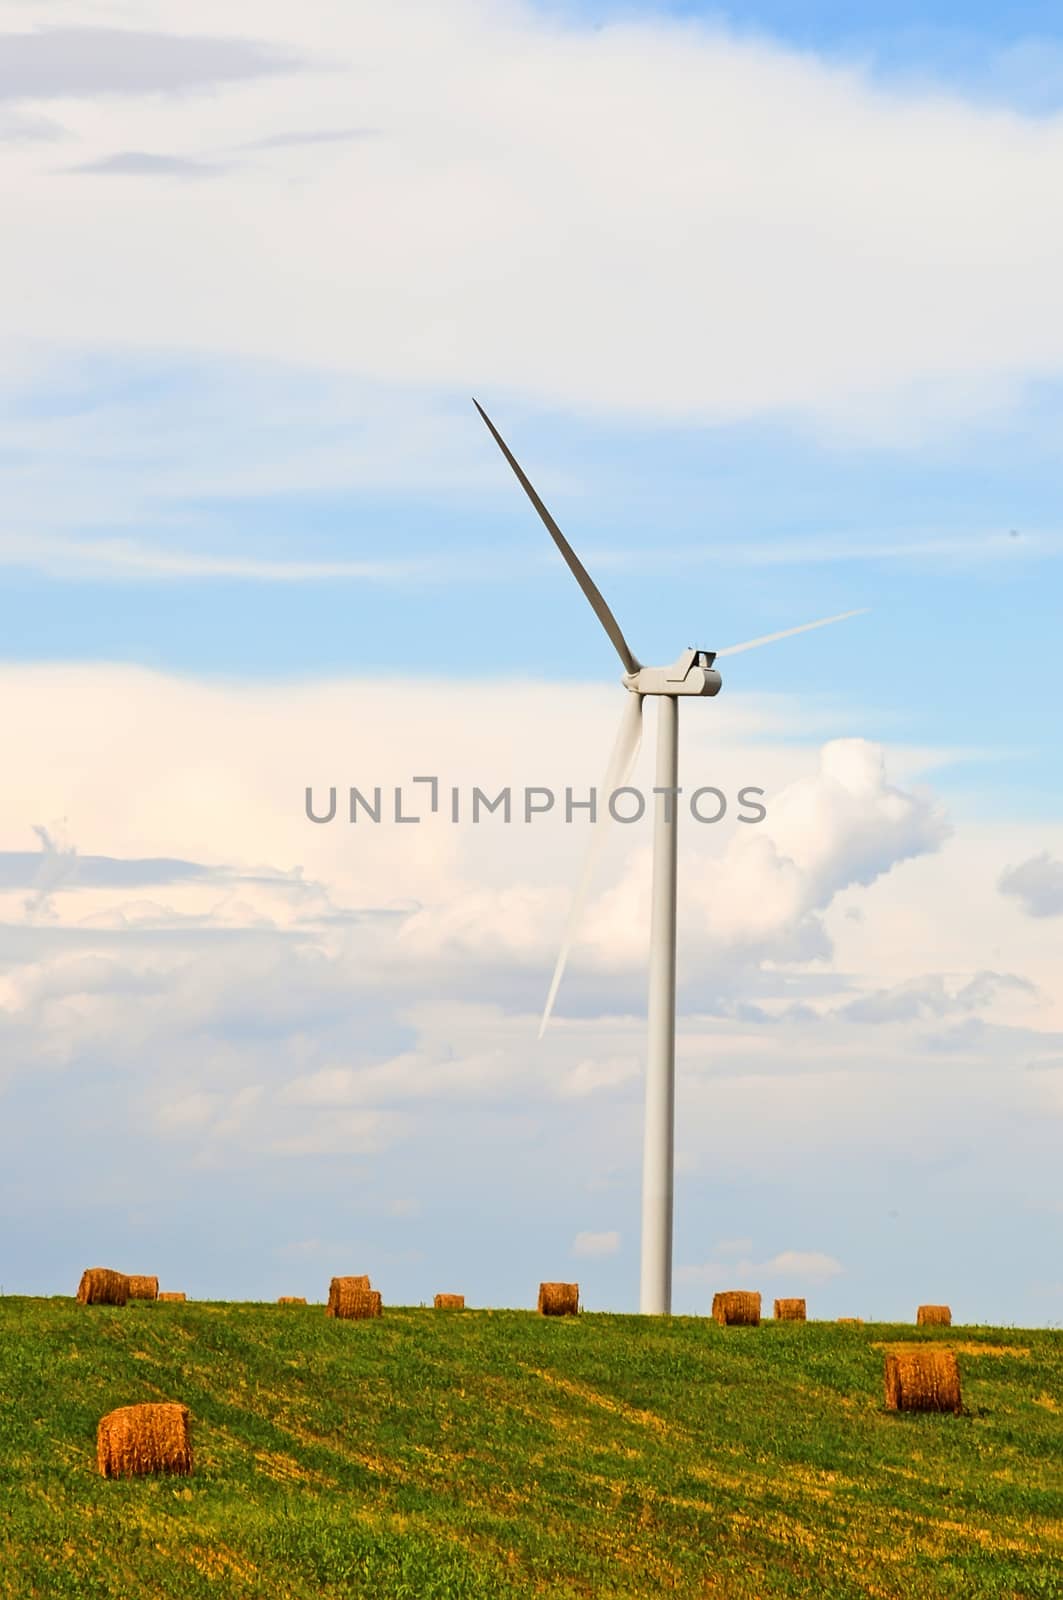 Wind turbines share a field with bales of straw as two renewable resources co-exist on the same land.